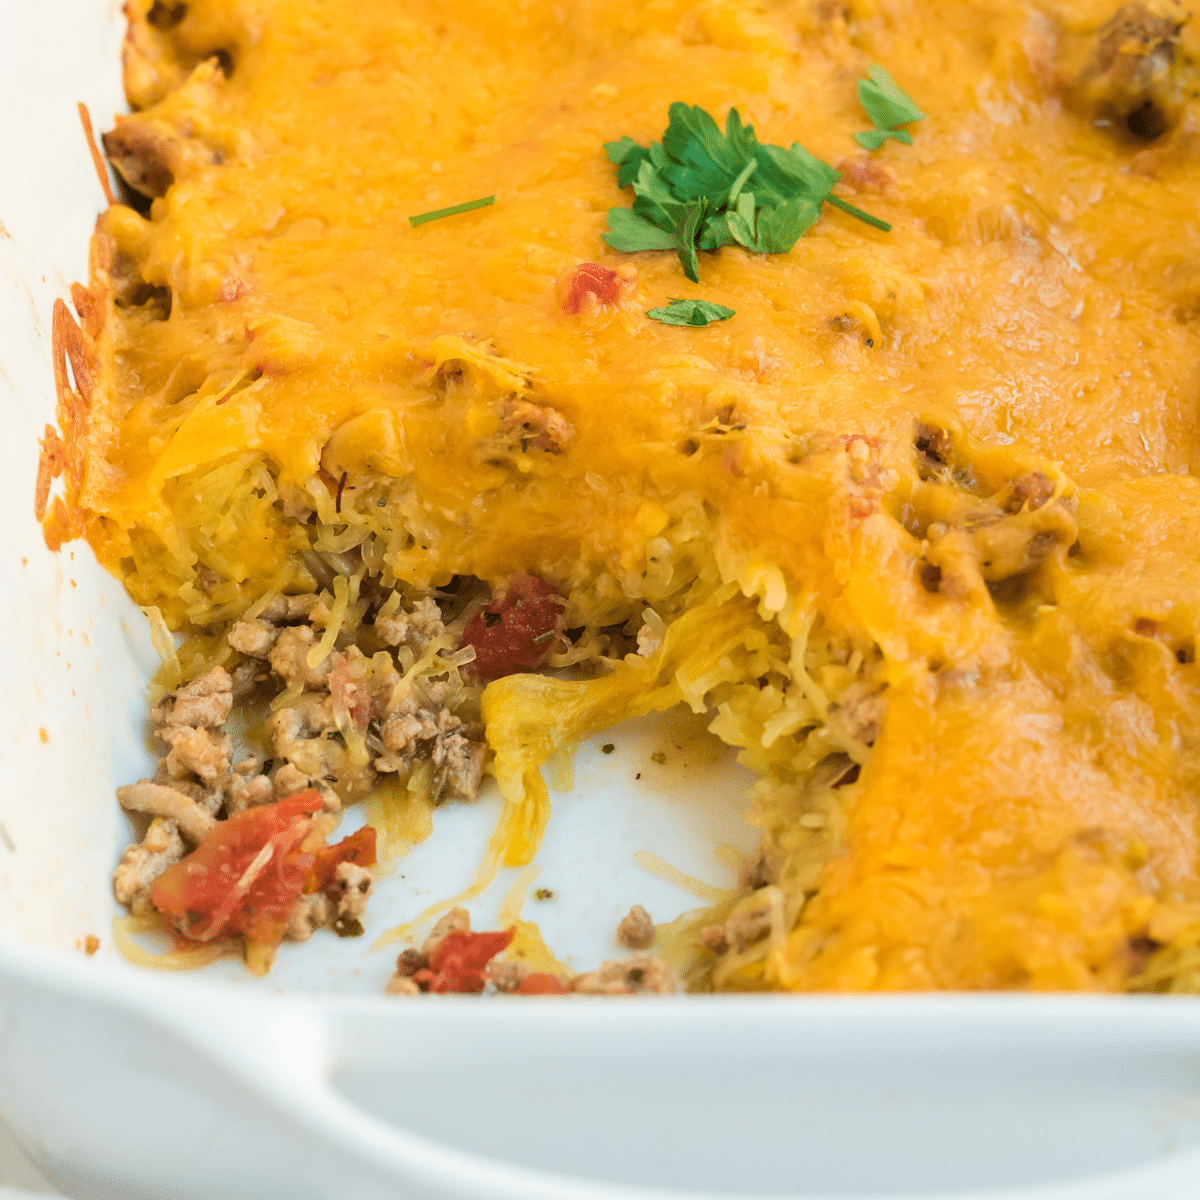 spaghetti squash with ground beef and tomatoes in a casserole dish